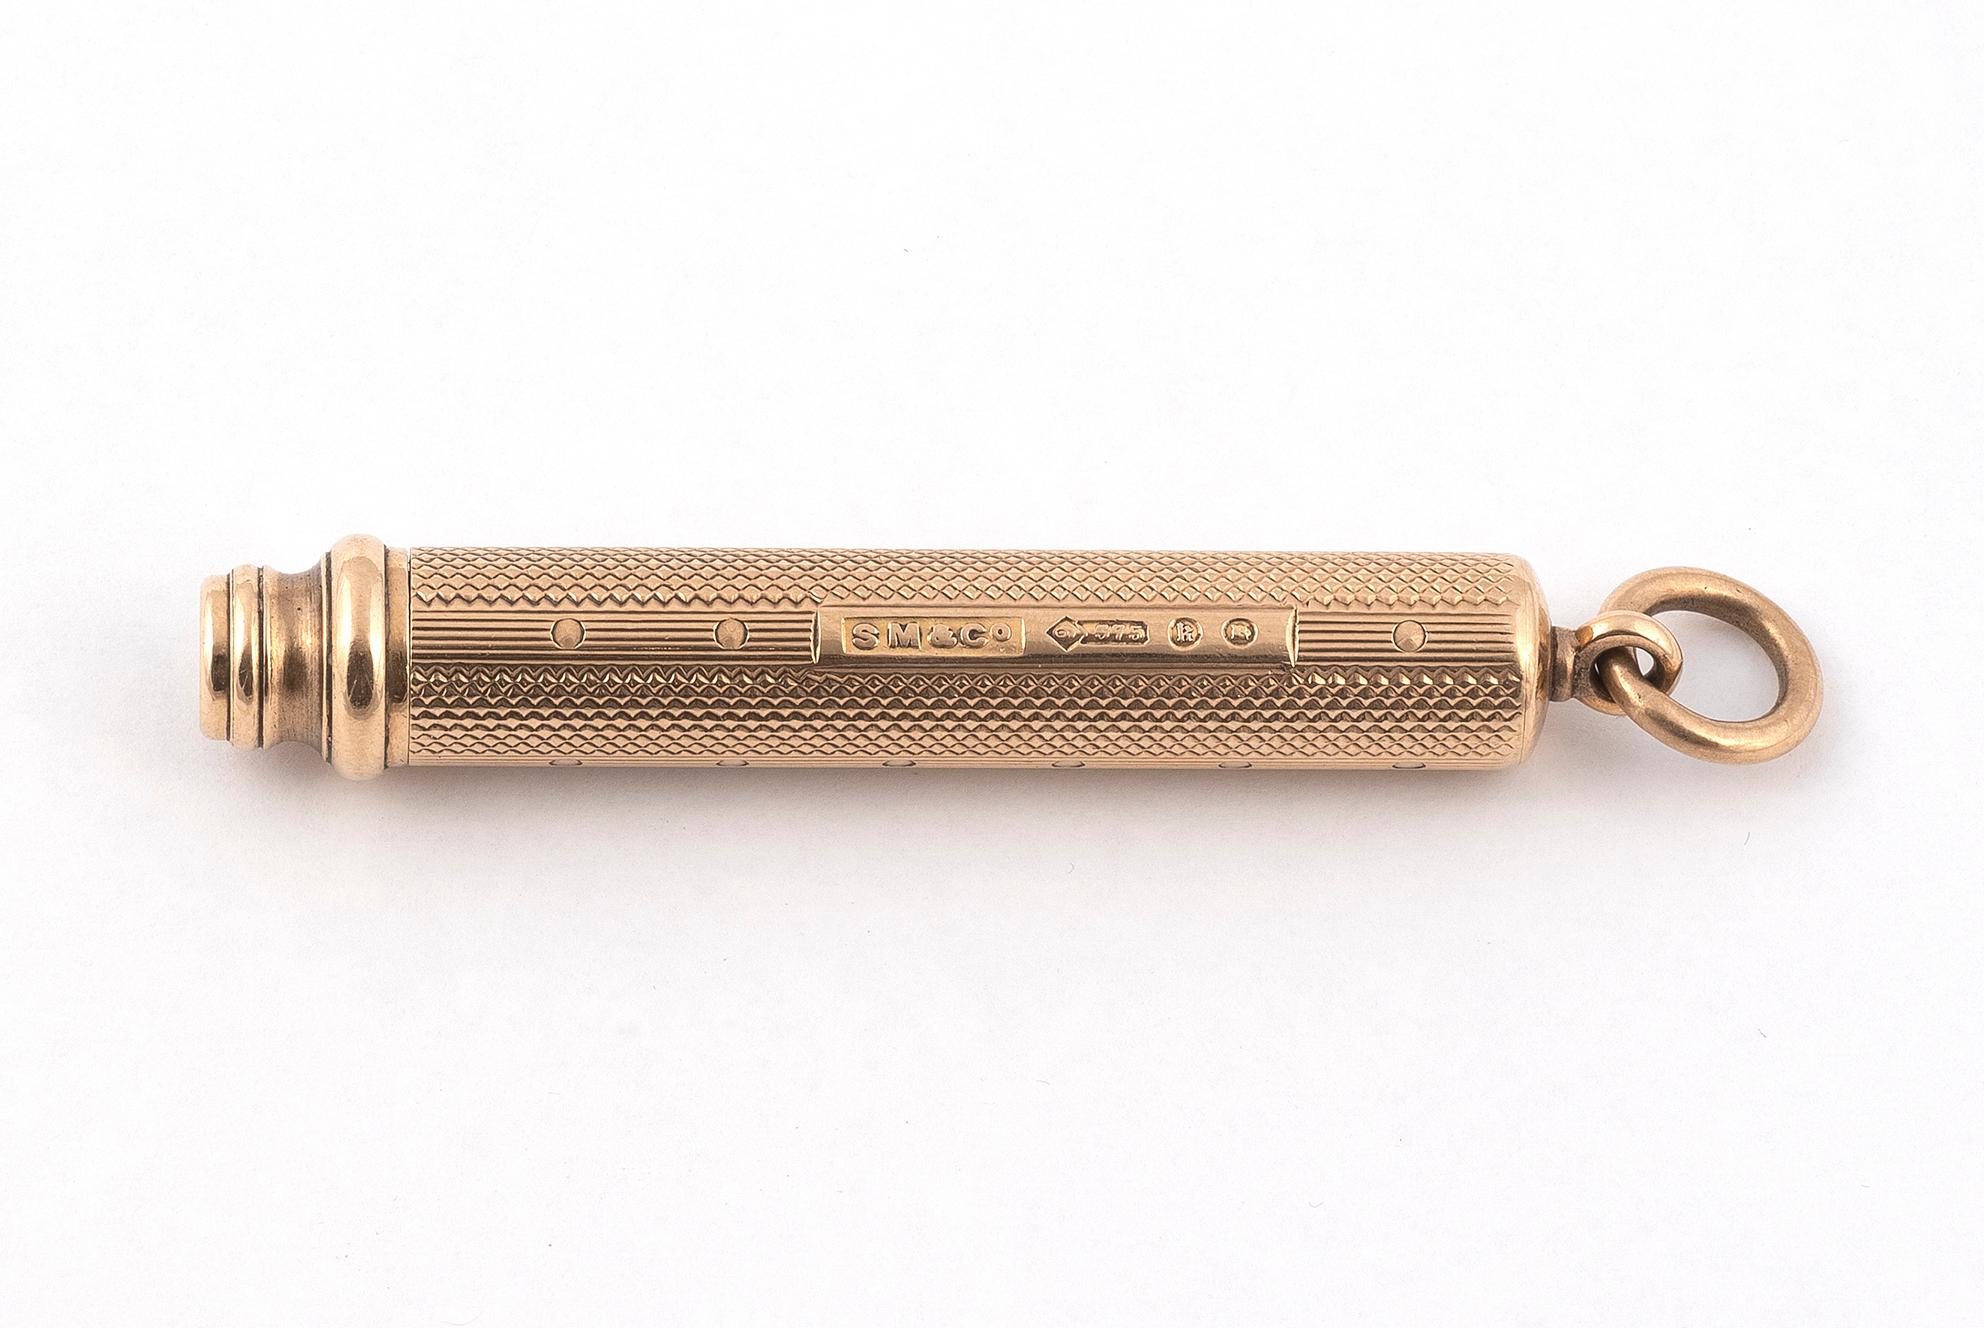 

by Sampson Mordan & Co, hallmarked for London, 1925, of plain cylindrical form, with ring terminal, length 10.3cm.